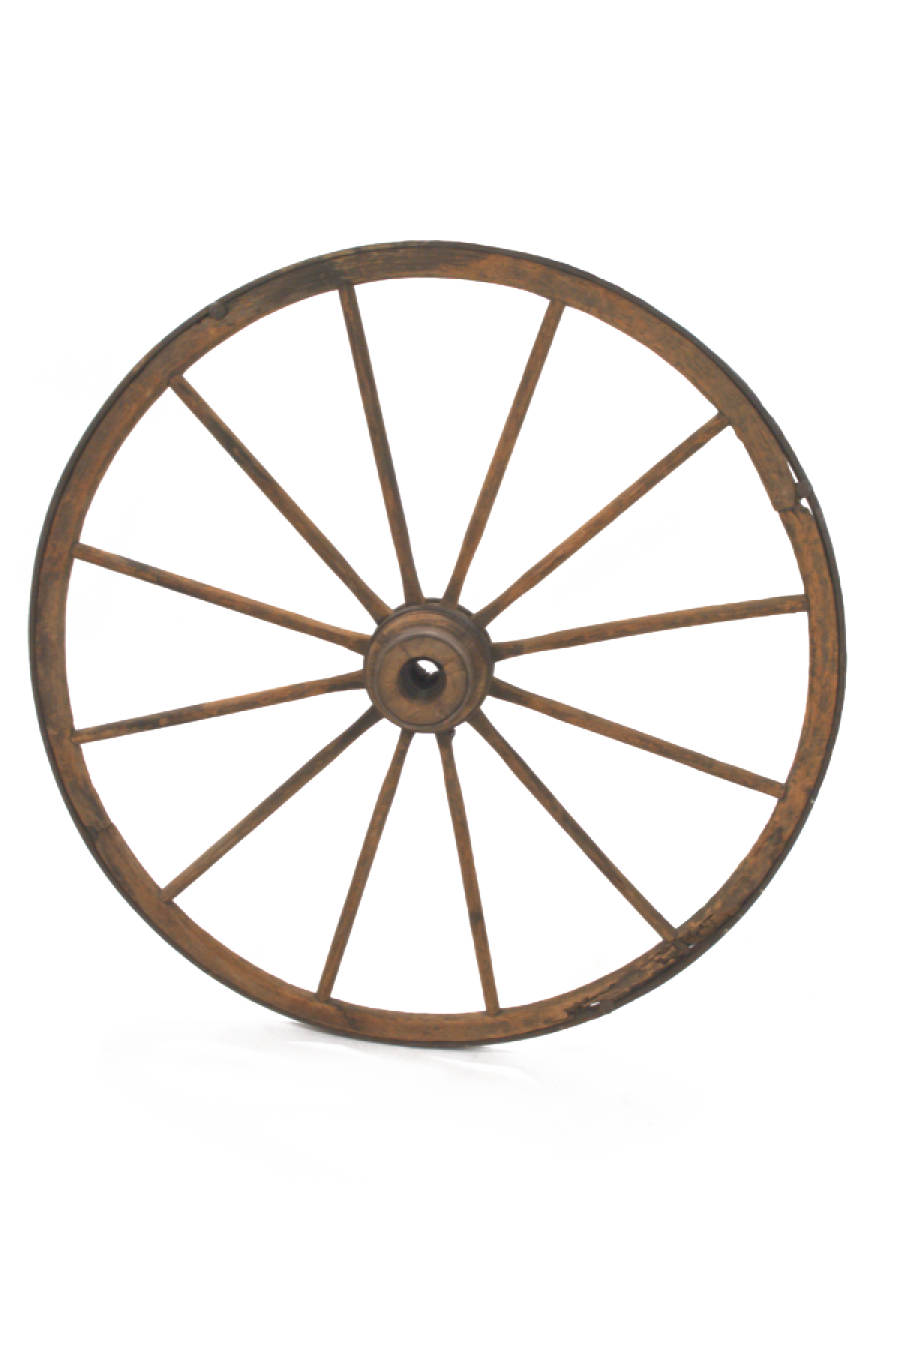 Wagon Wheel PNG Télécharger limage